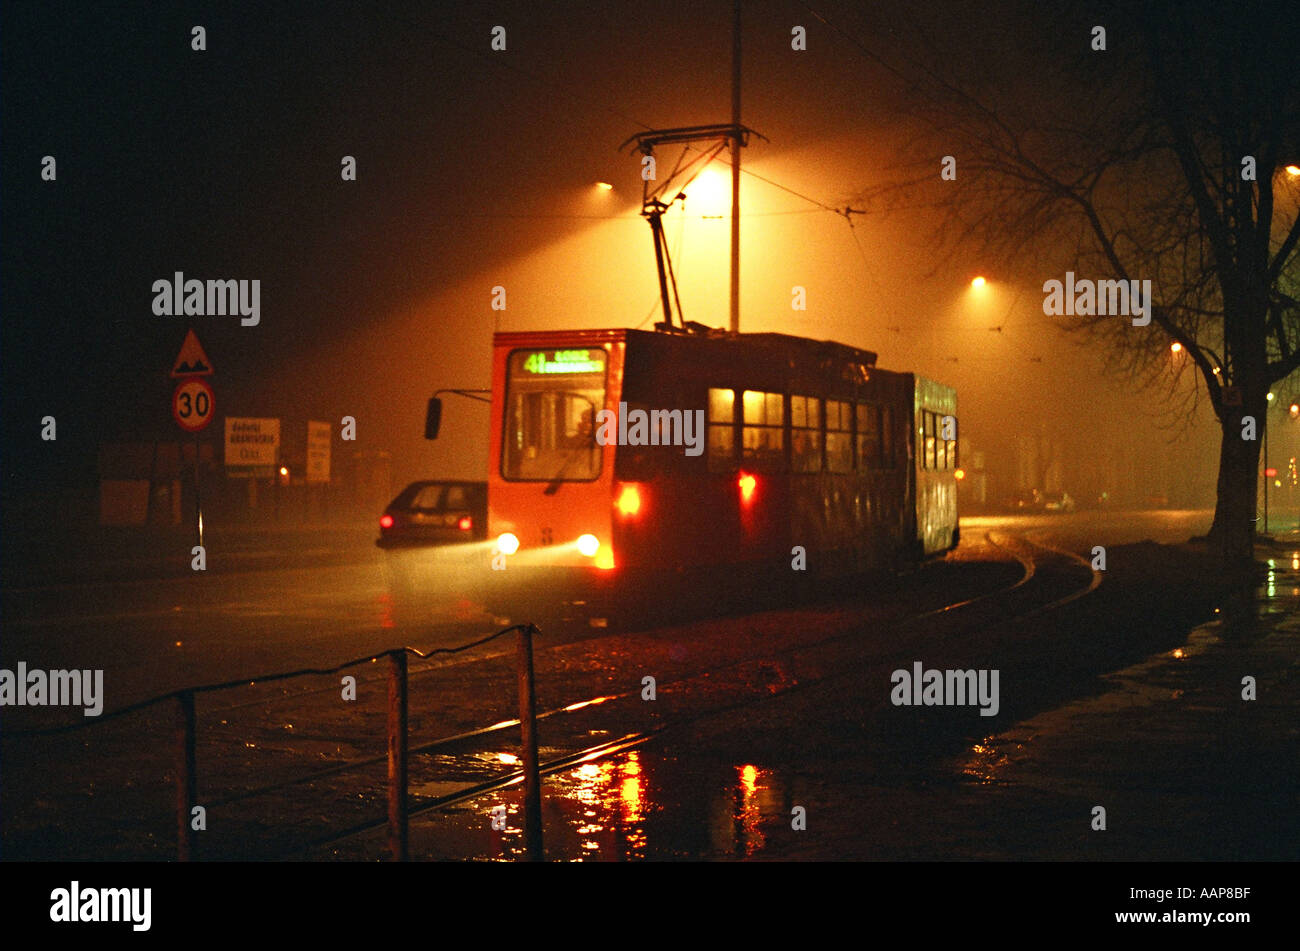 tram number 41 from Pabianice to Lodz, Poland Stock Photo